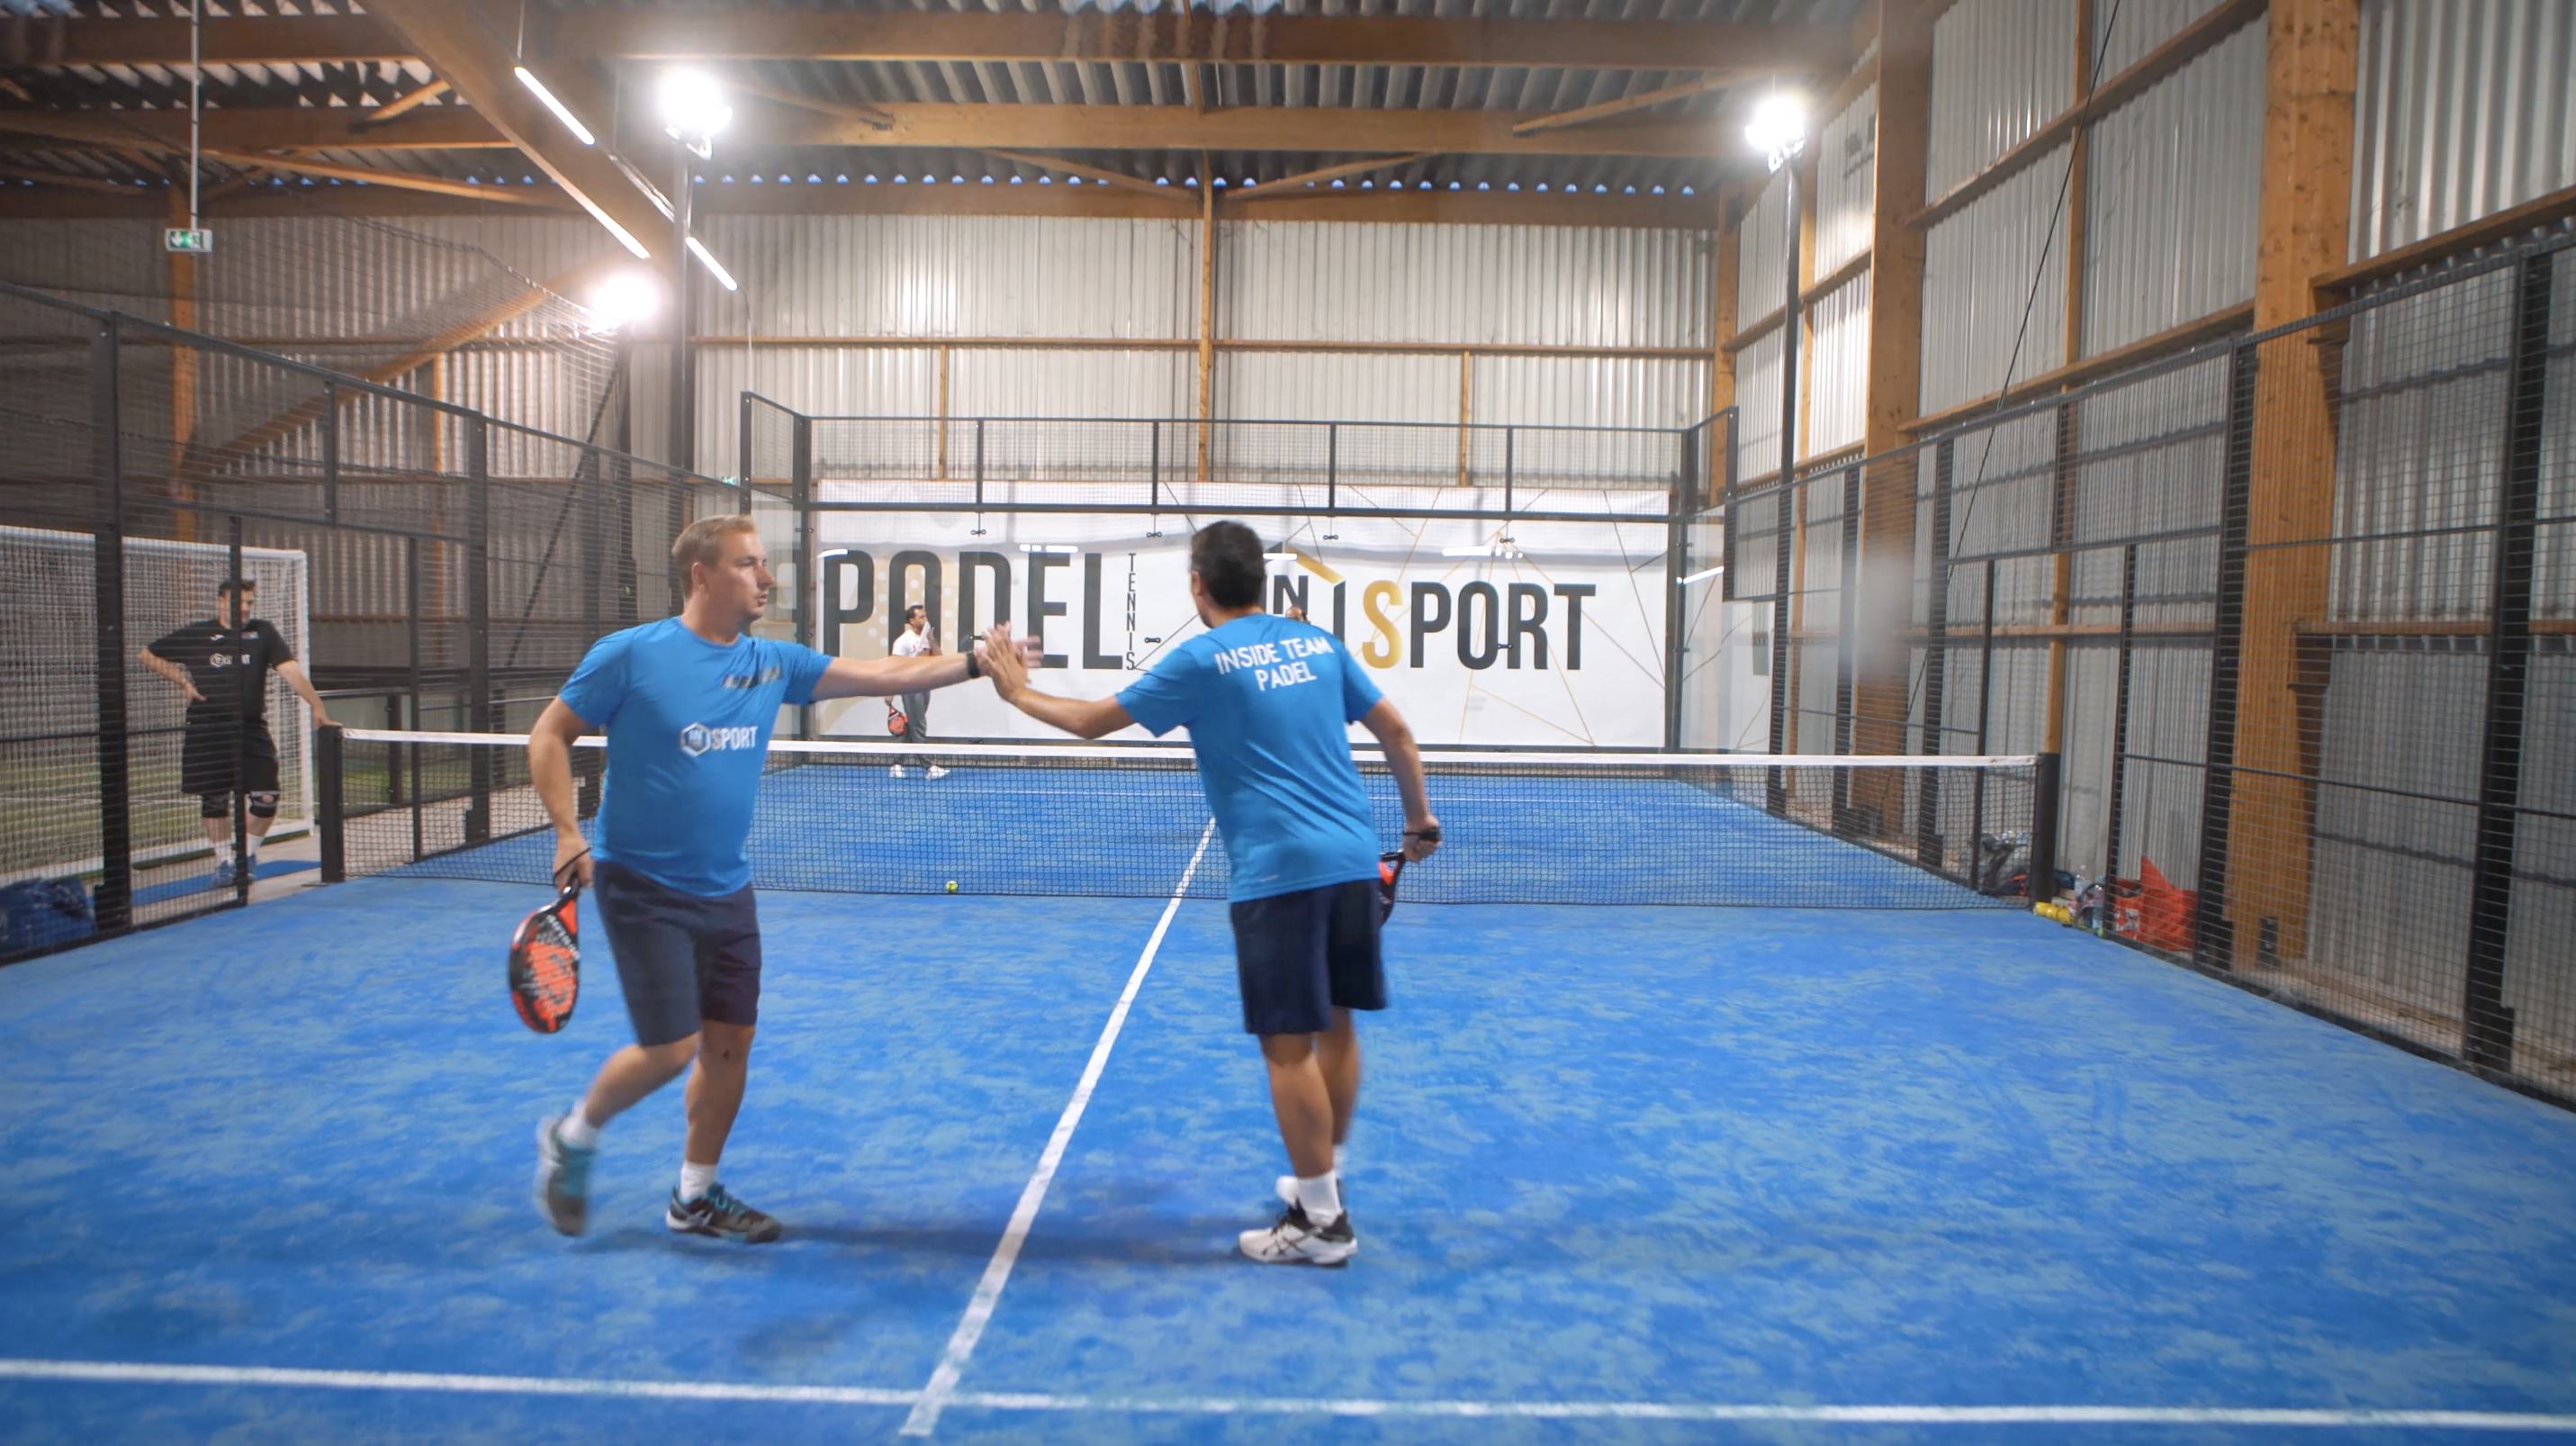 INSIDE SPORT is recruiting a project manager Padel